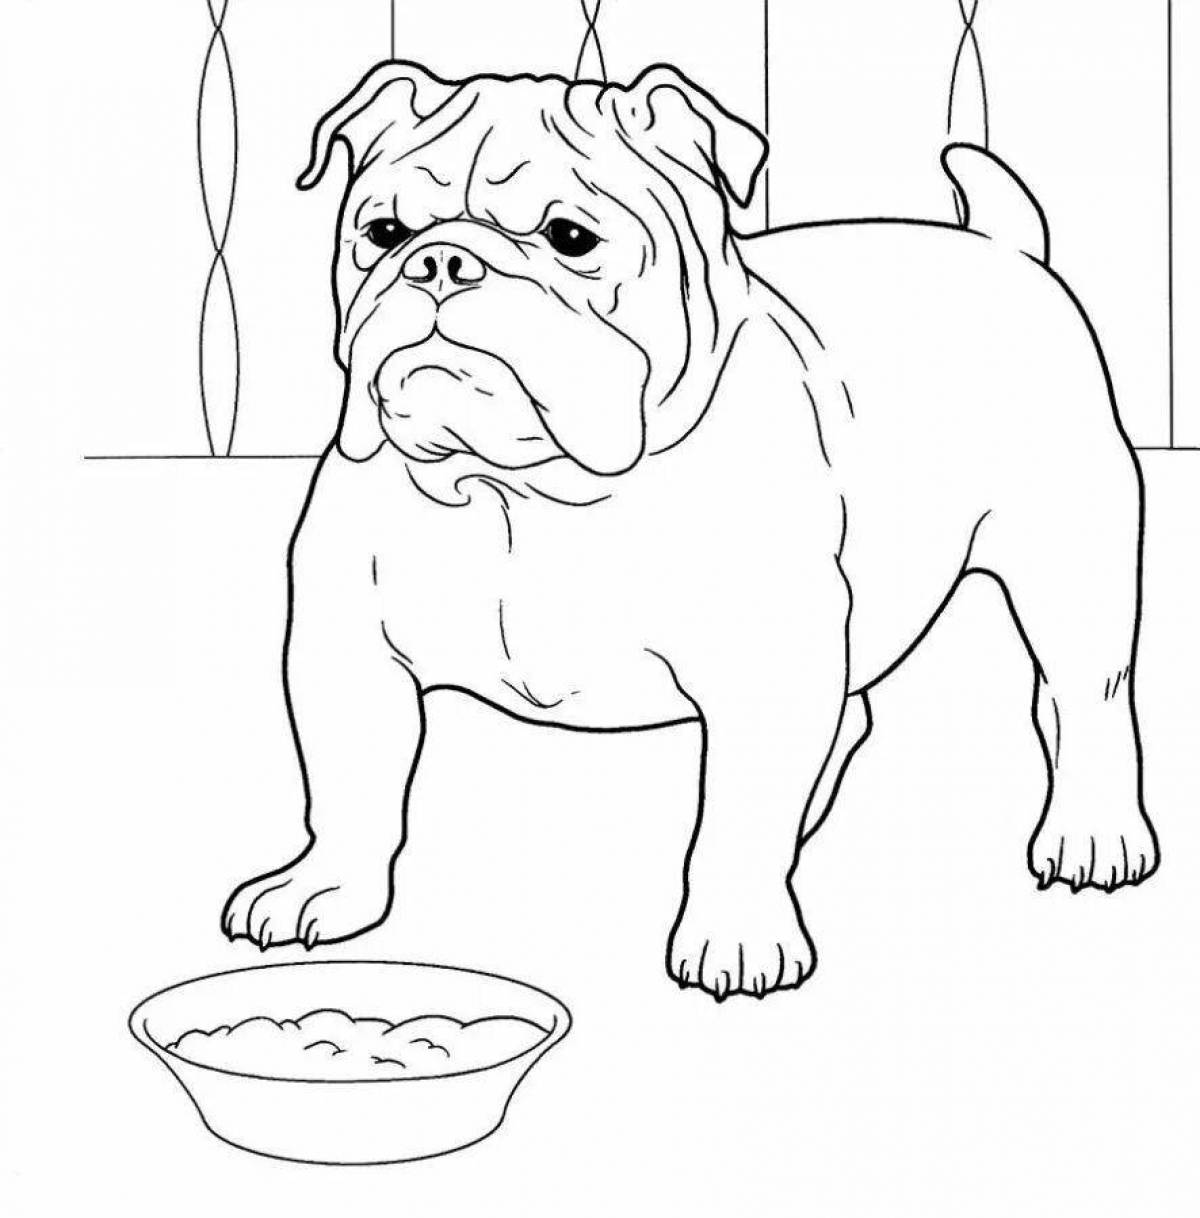 Affectionate bulldog coloring pages for kids